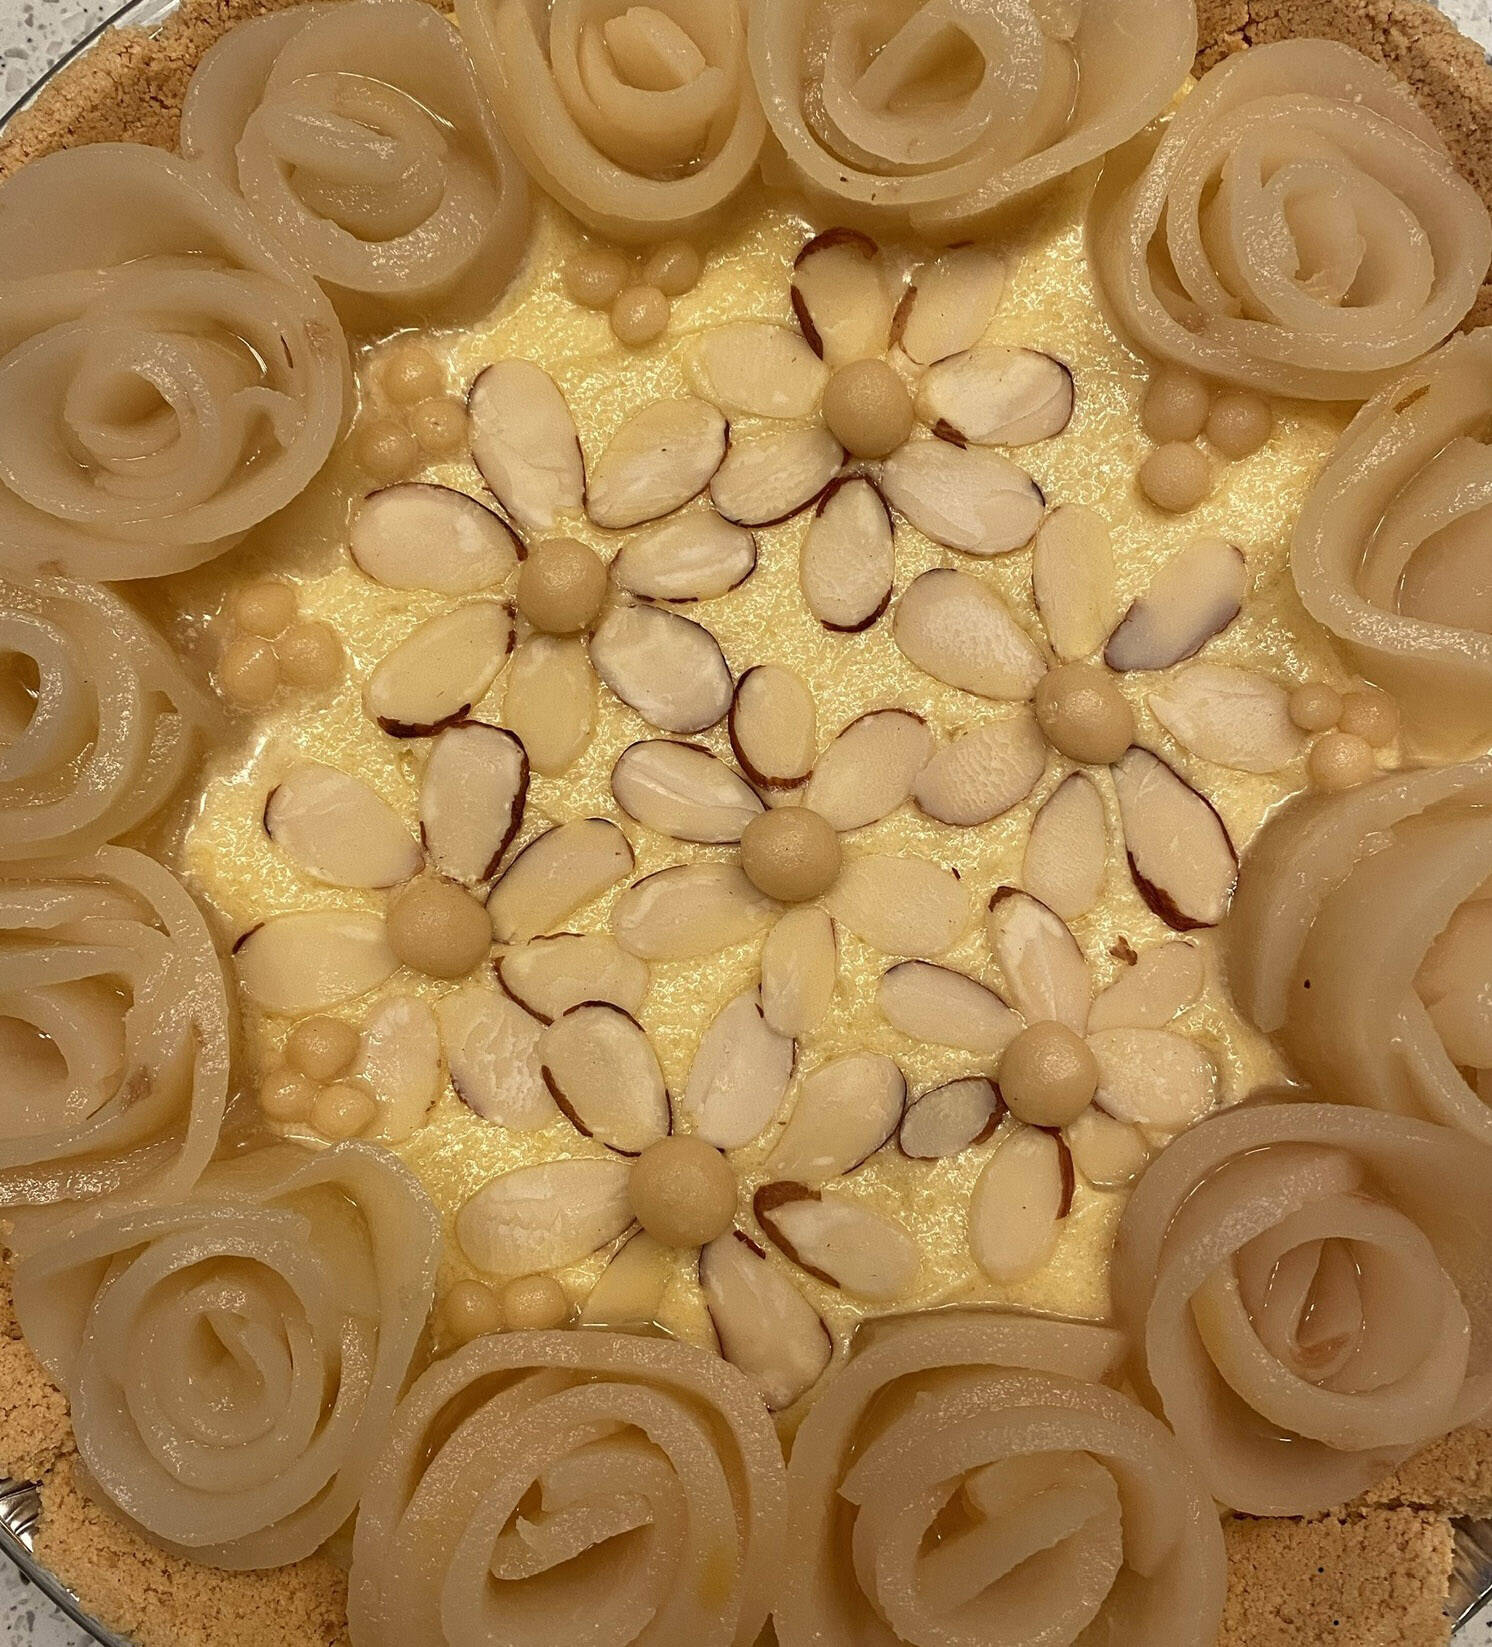 This poached pear frangipane tart takes a little planning and skill, but with patience and vision, you too can create a sweet, almond scented masterpiece. (Photo by Tressa Dale/Peninsula Clarion)